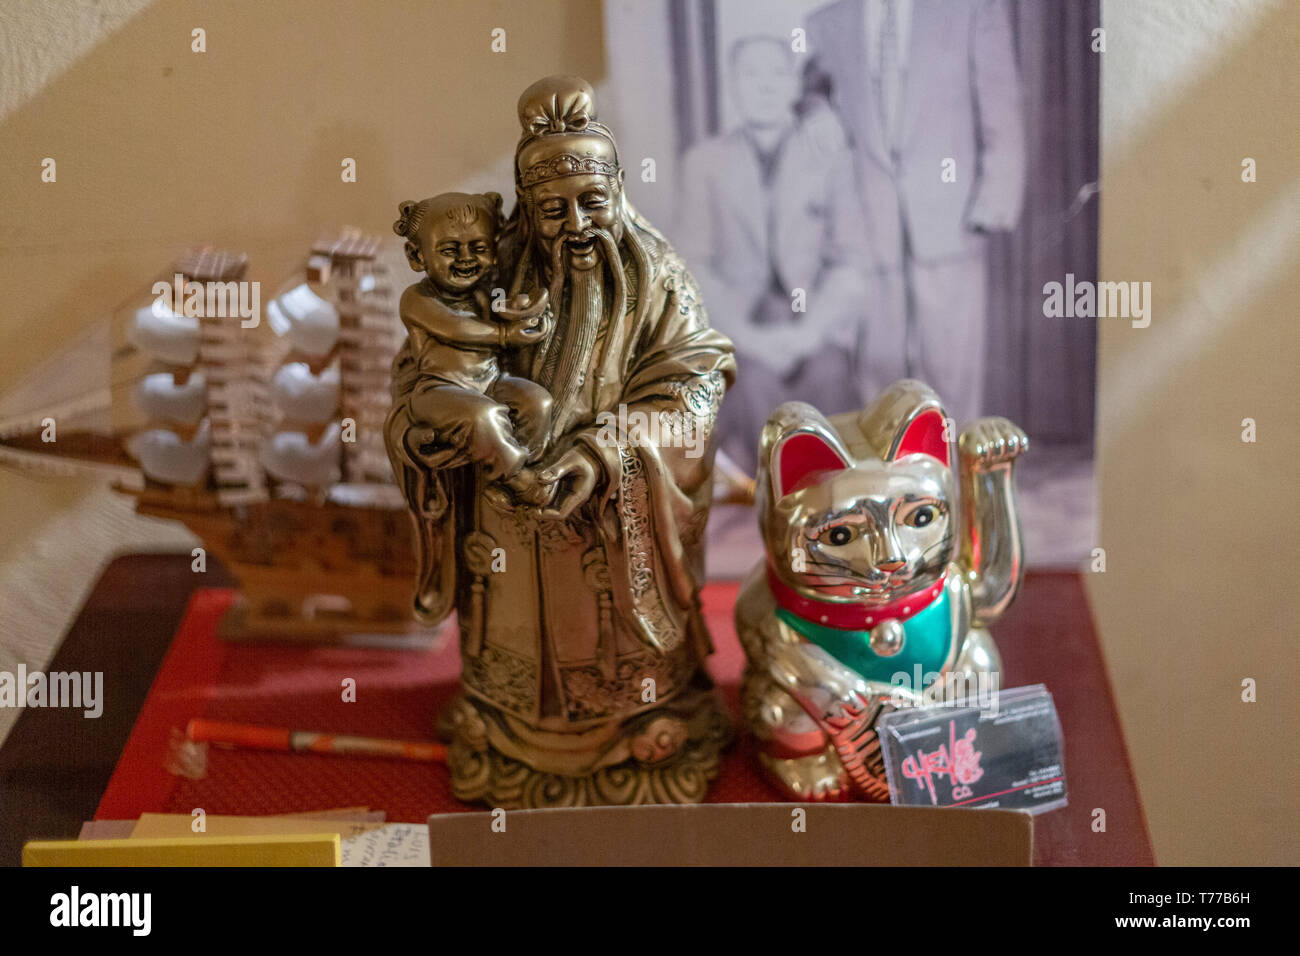 MEXICALI, MEXICO - April 8 Chinese lucky charms  decorate the basement  of a watch shop basement downtown Mexicali  April 8, 2019 in Mexicali, Mexico. Stock Photo